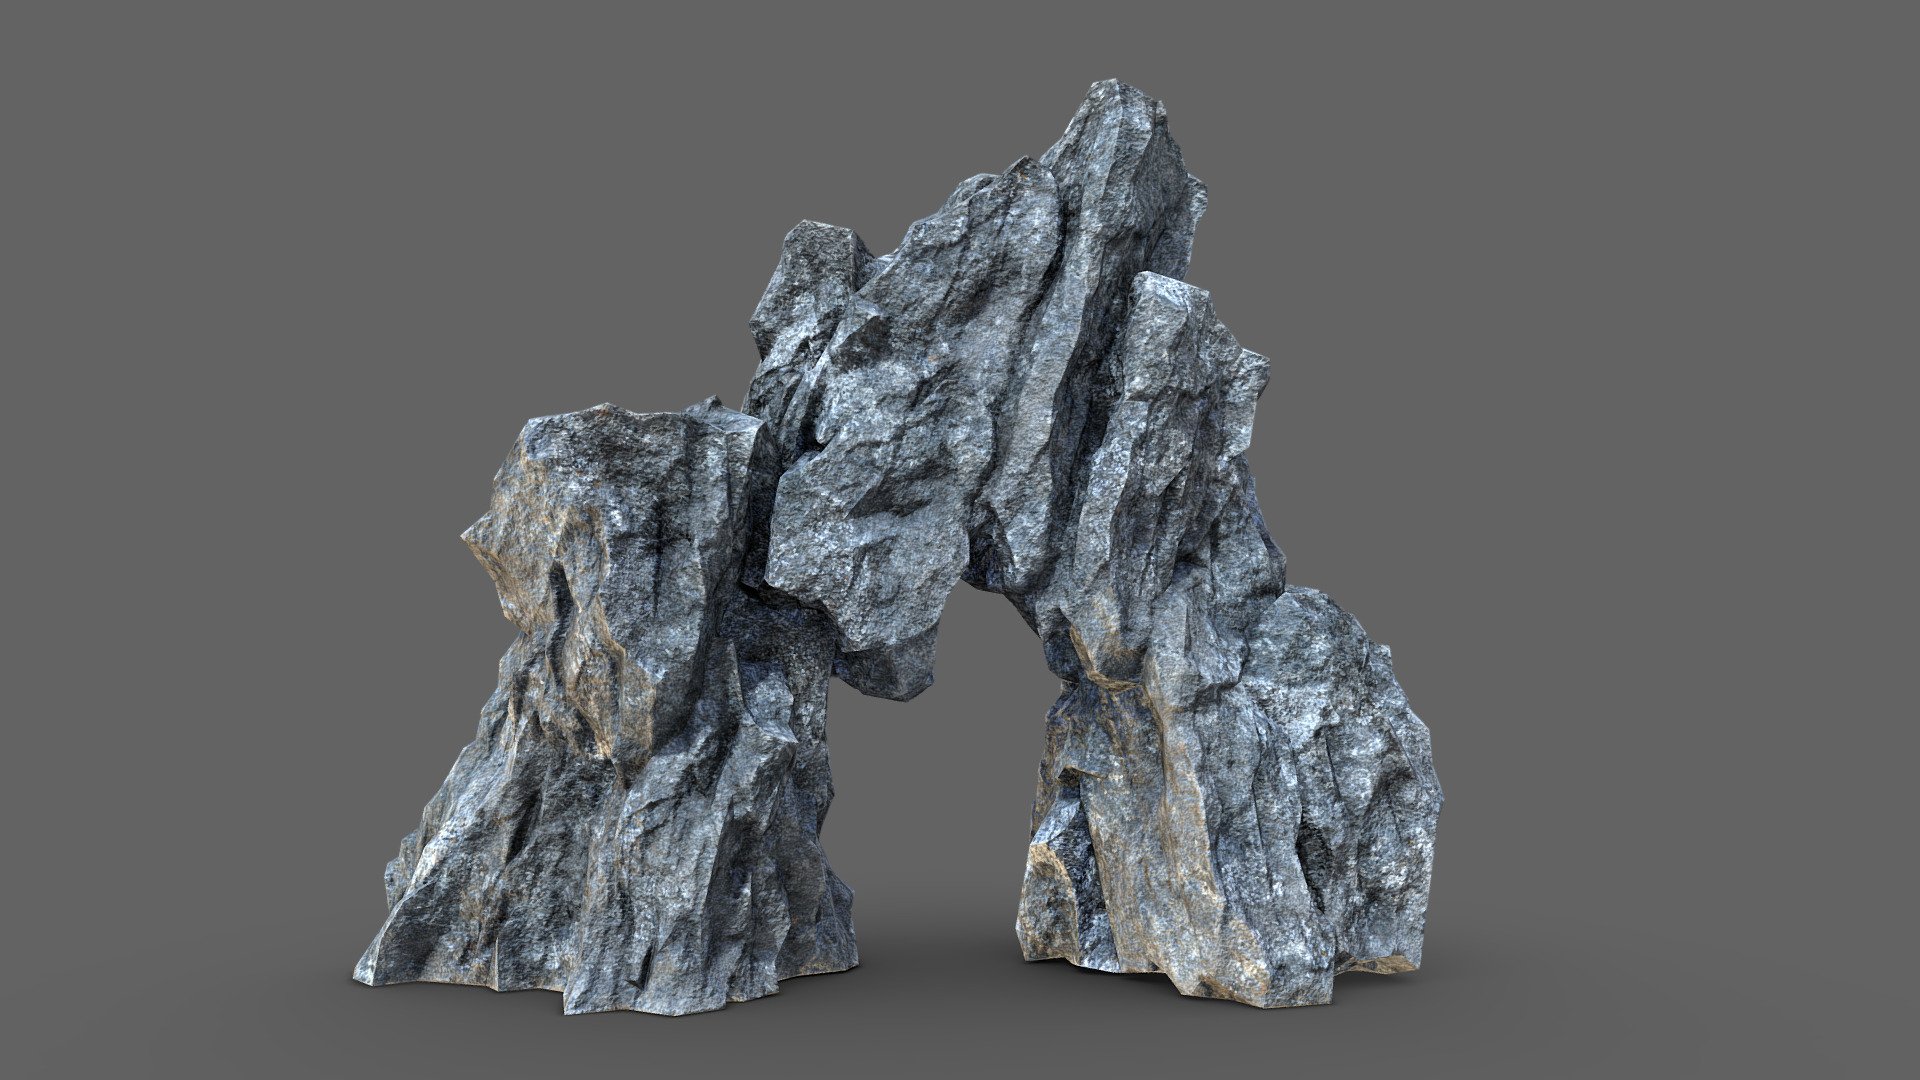 Rock 7_2 low poly

Topology: Tris

Polygon count: 4994

Vertices count: 2499

Textures: Diffuse, Normal, Specular, Glossiness, Curvature, Height, Ambient Occlusion ( all in 4k resolution)

UV mapped with non-overlapping

All files are zipped in one folder. Contains 3 file formats obj, ma &amp; fbx

Useful for games, renders, background scenes and other graphical projects 3d model